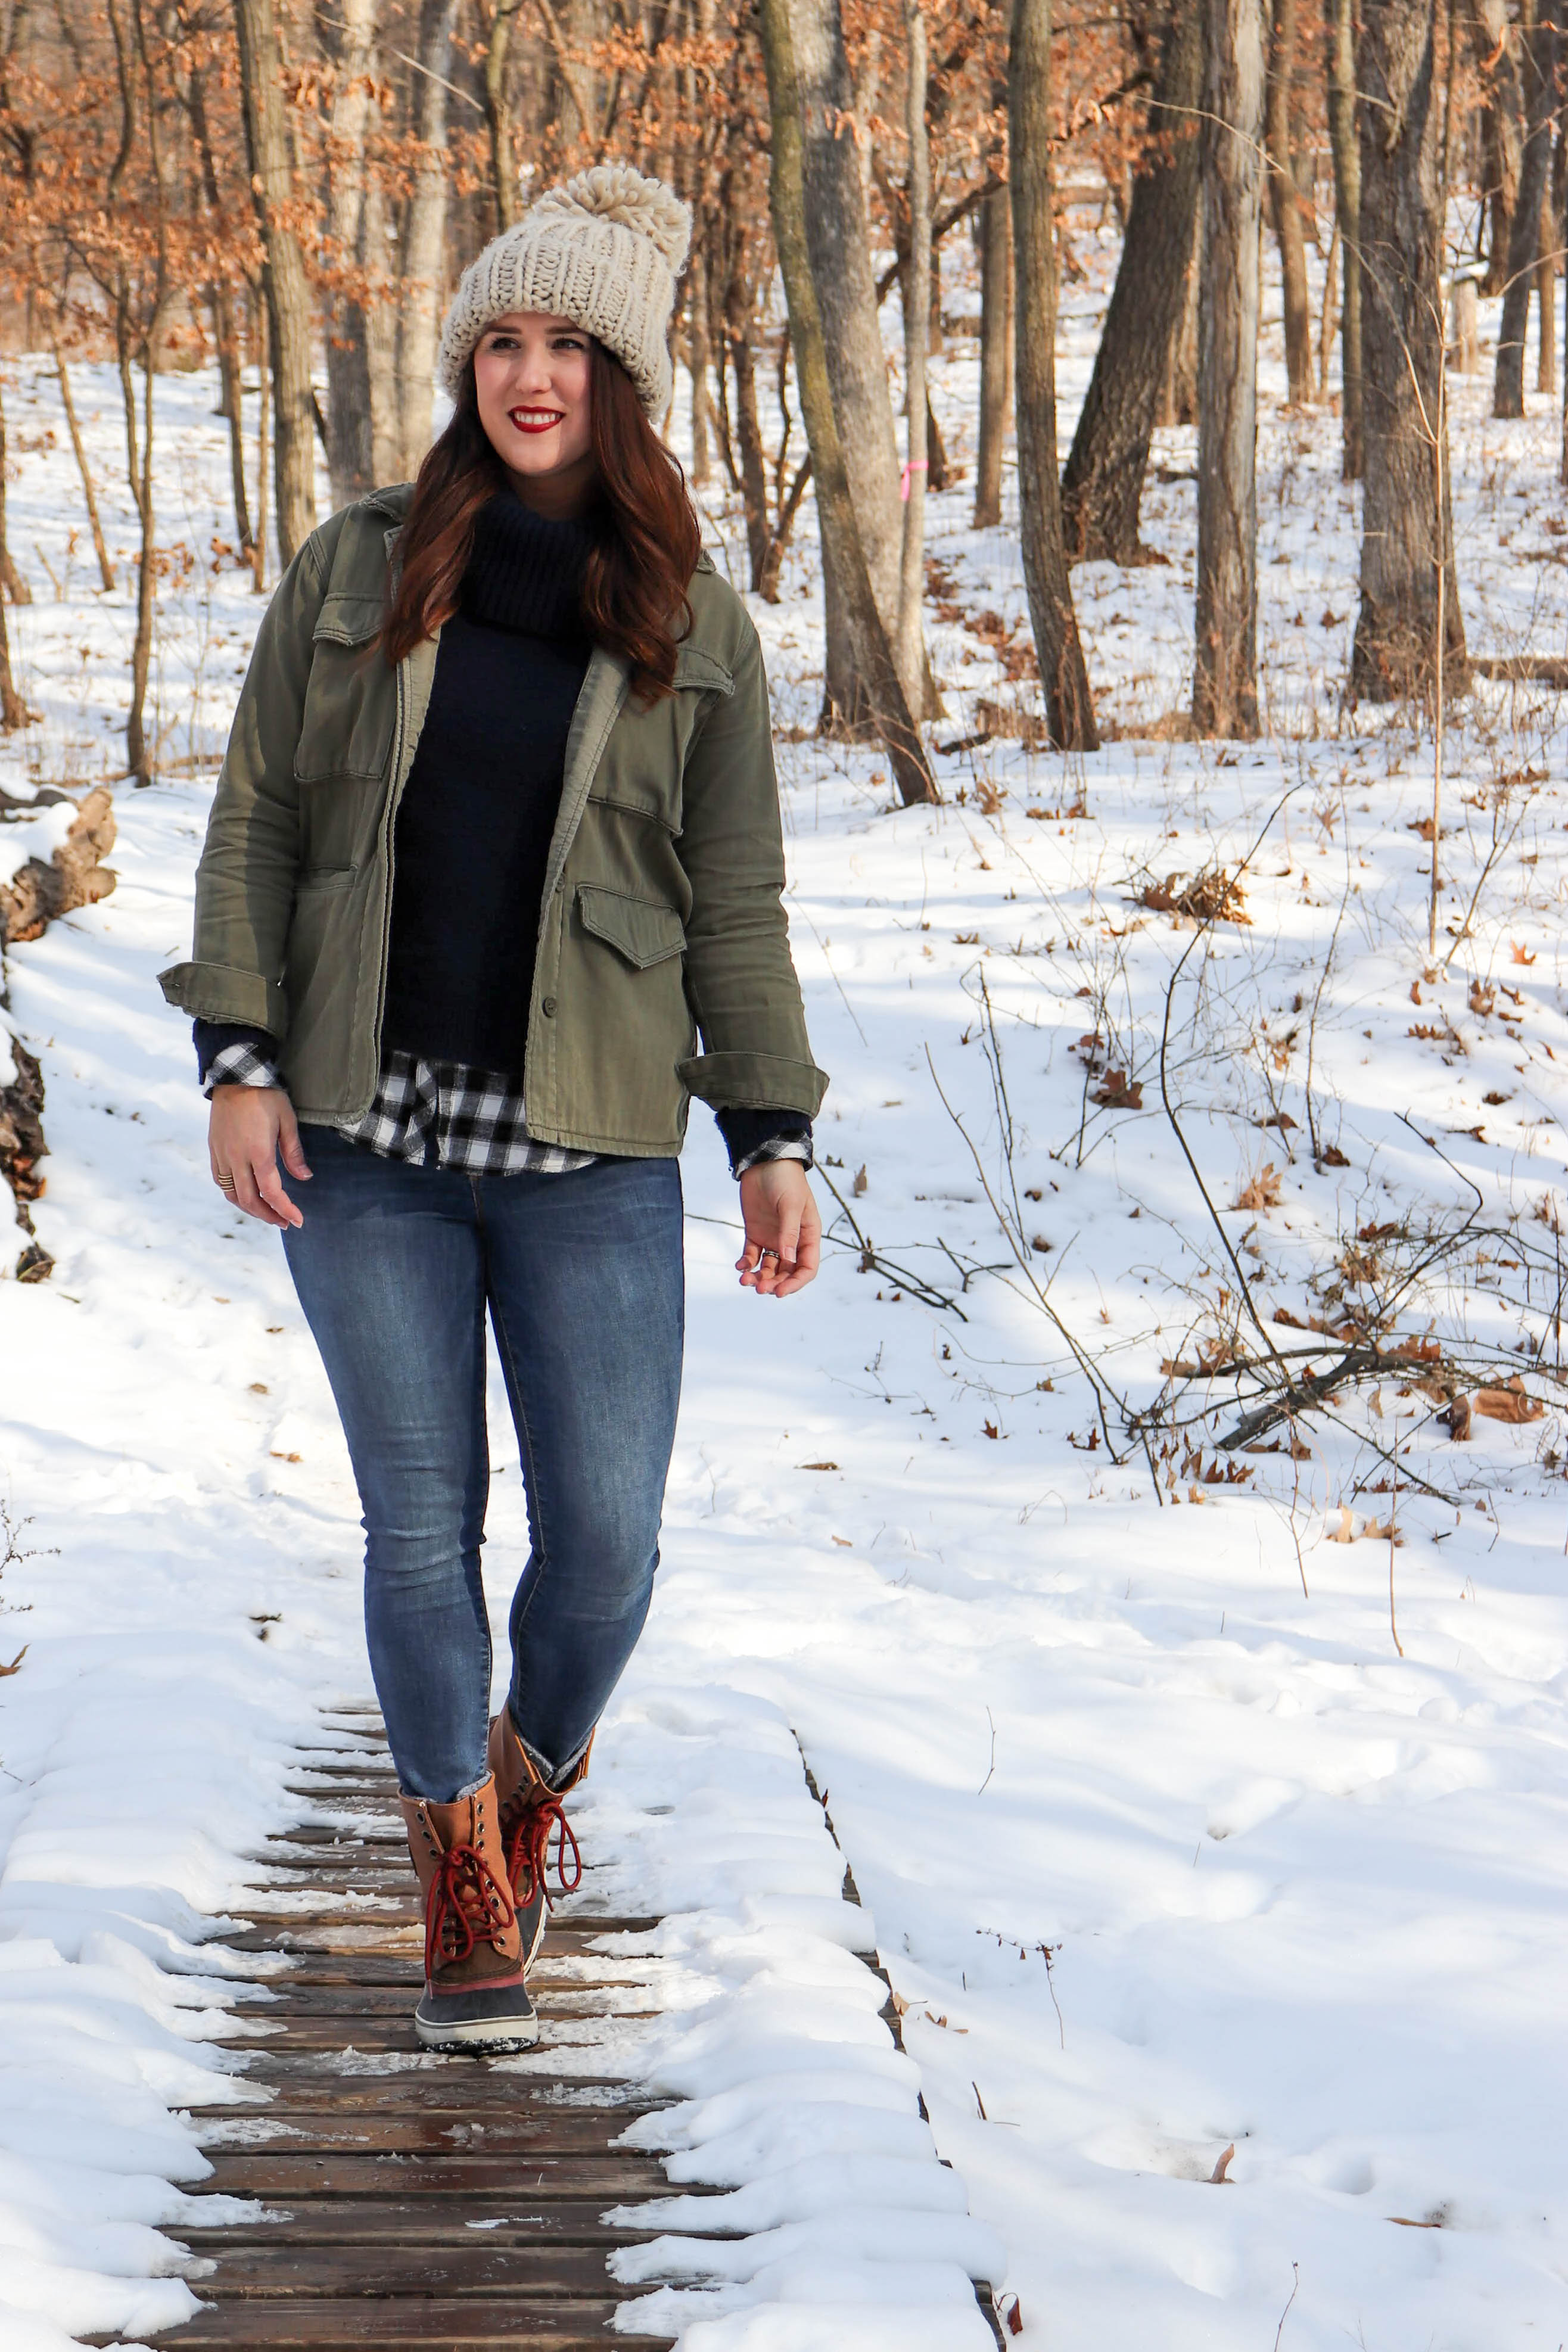 winter layering - how to fashionably layer for cold weather